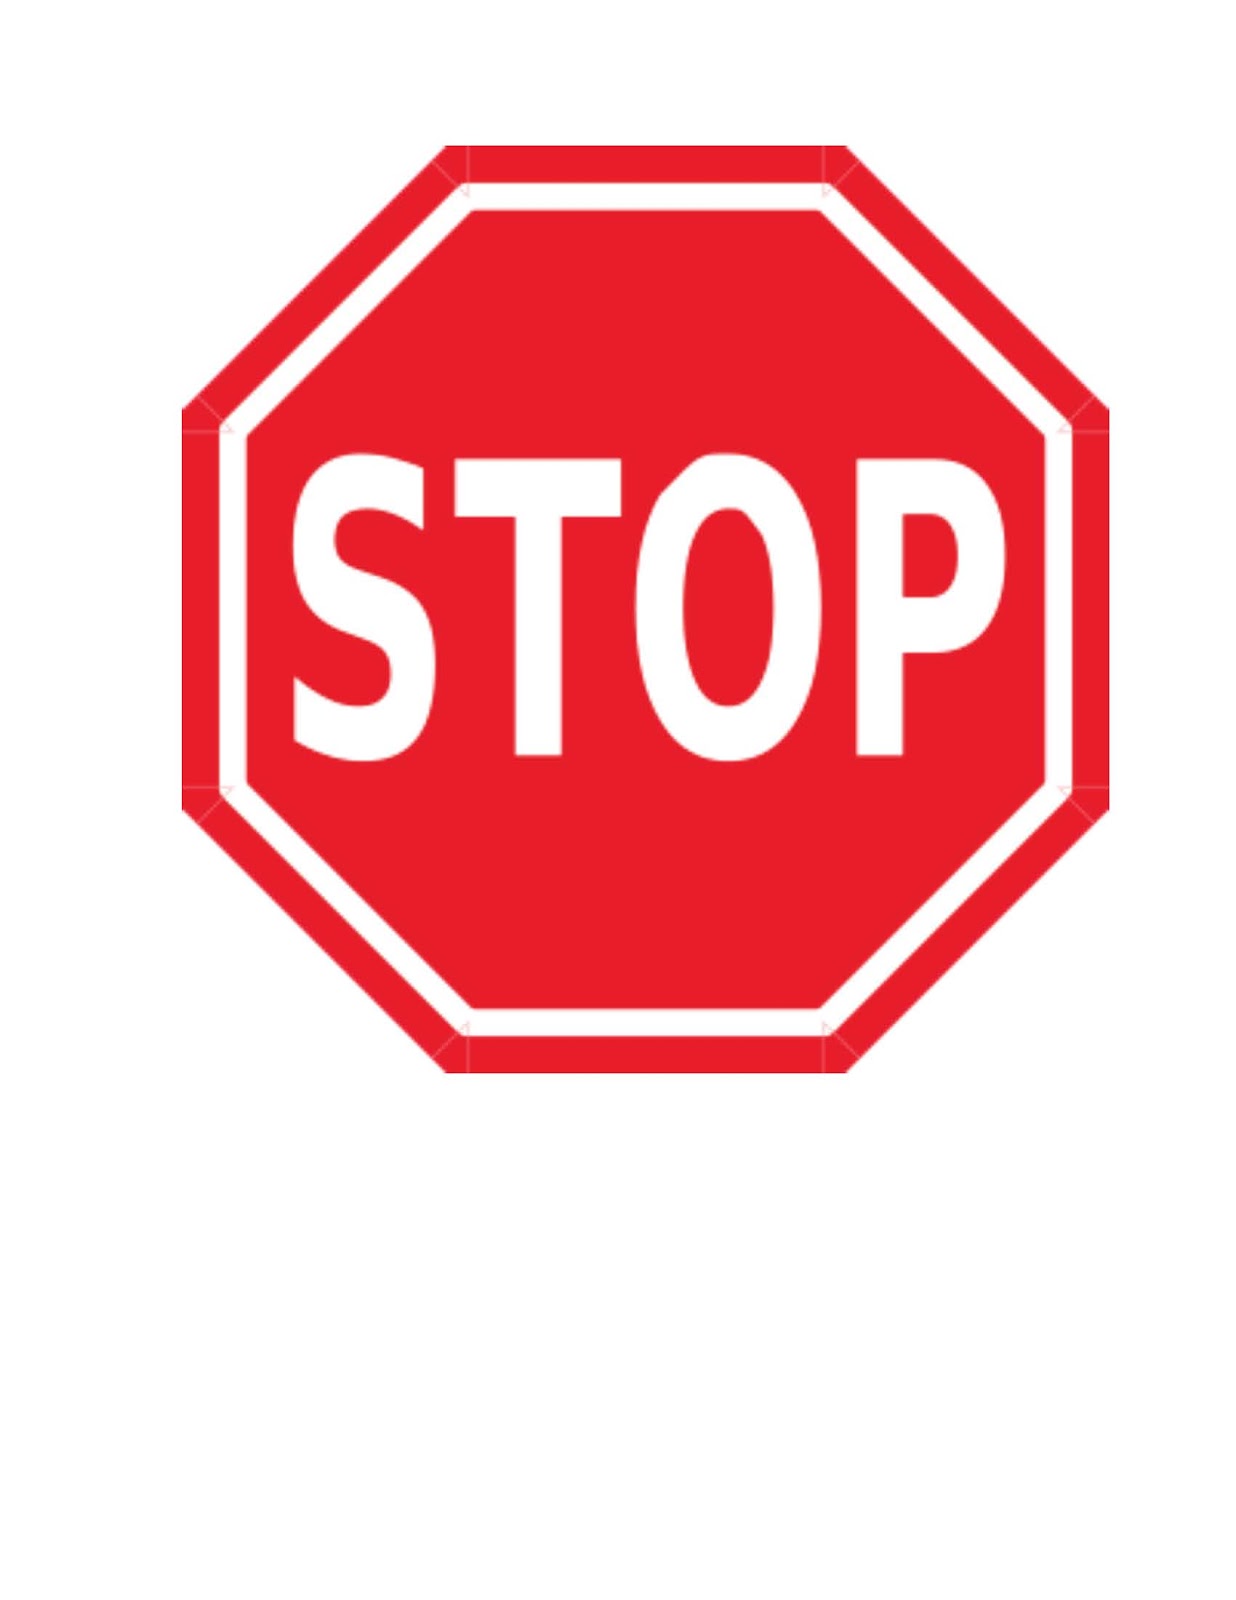 free-stop-sign-image-download-free-stop-sign-image-png-images-free